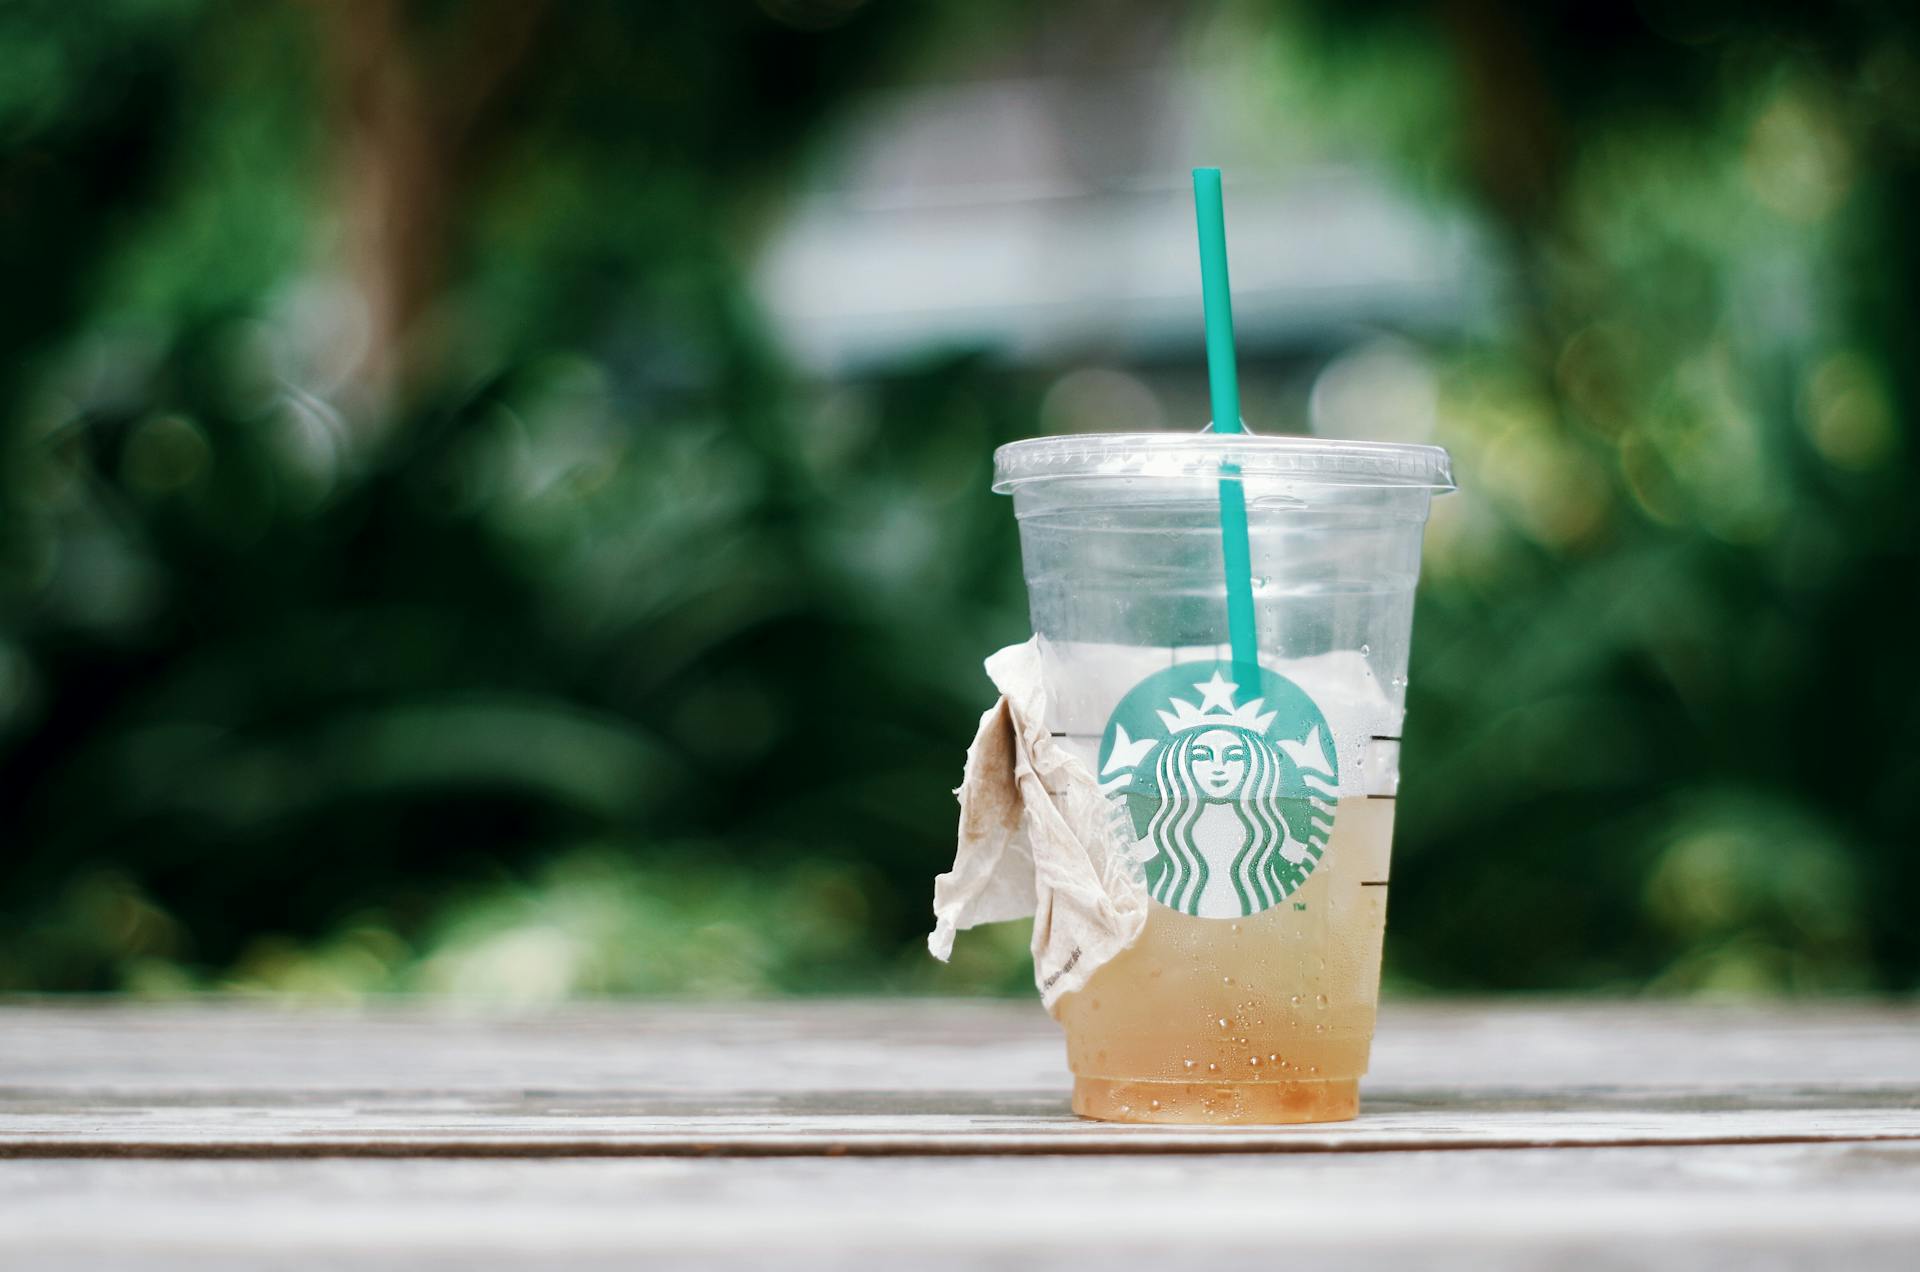 Iced tea in a disposable Starbucks cup | Source: Pexels